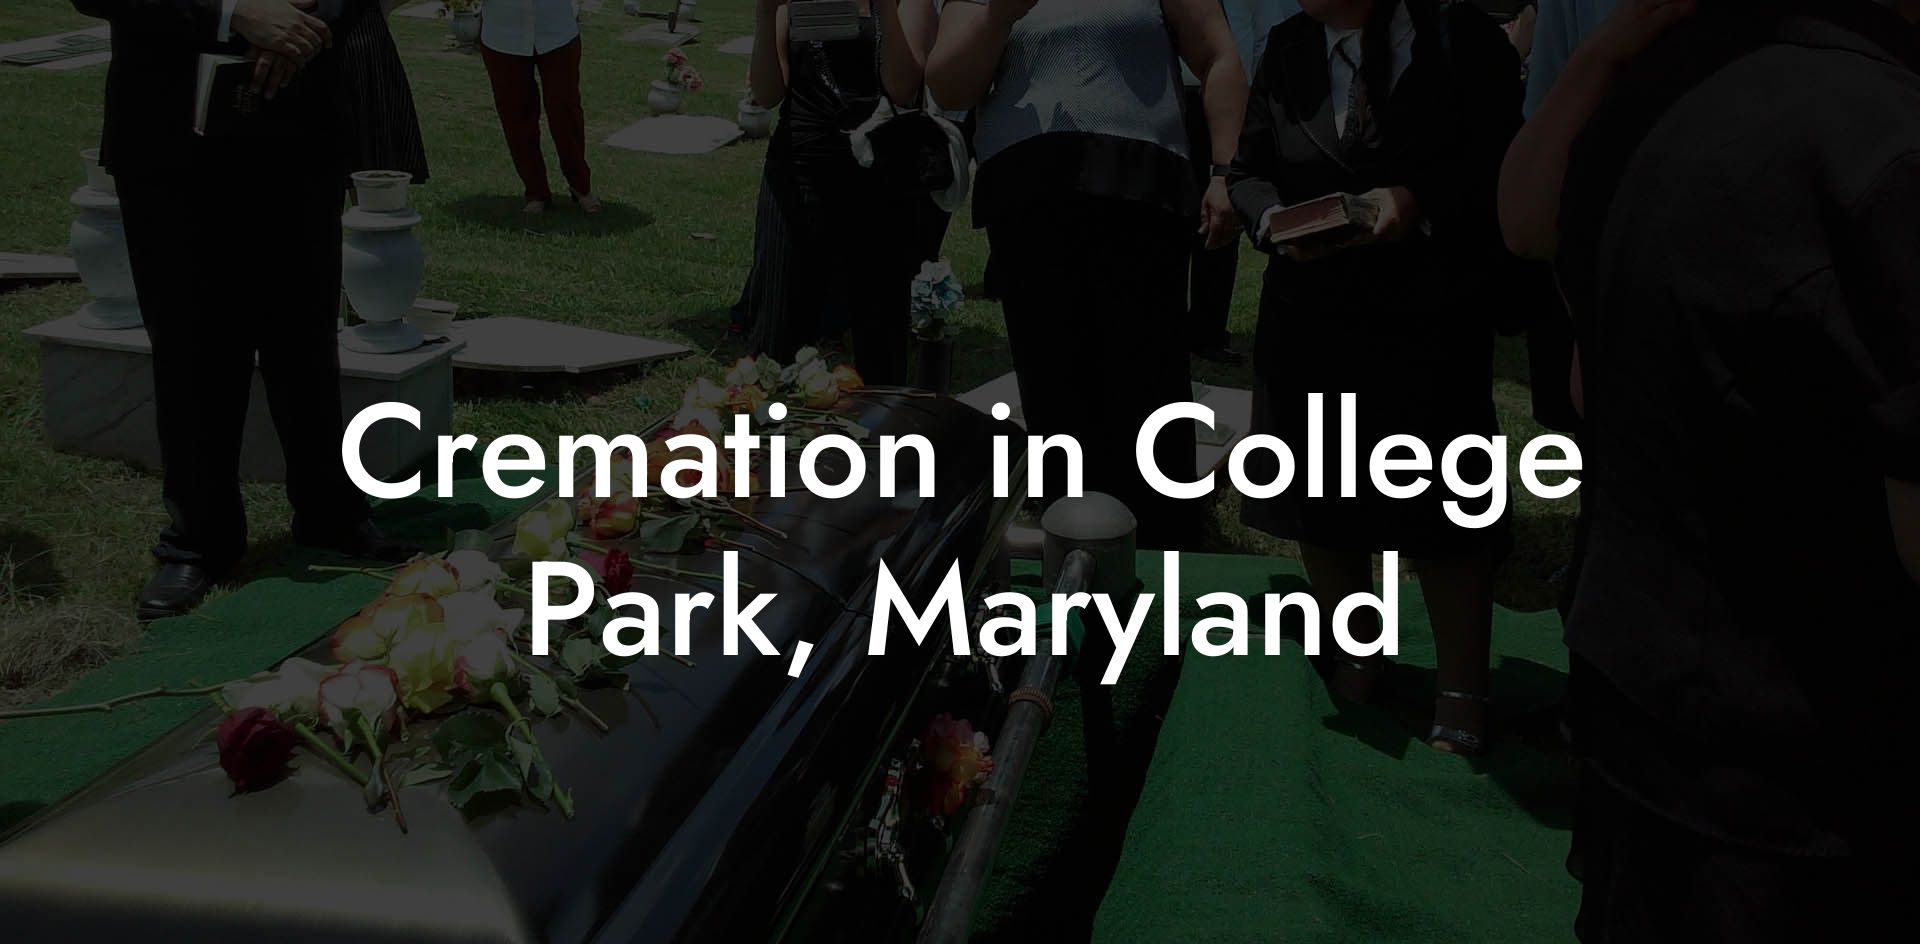 Cremation in College Park, Maryland